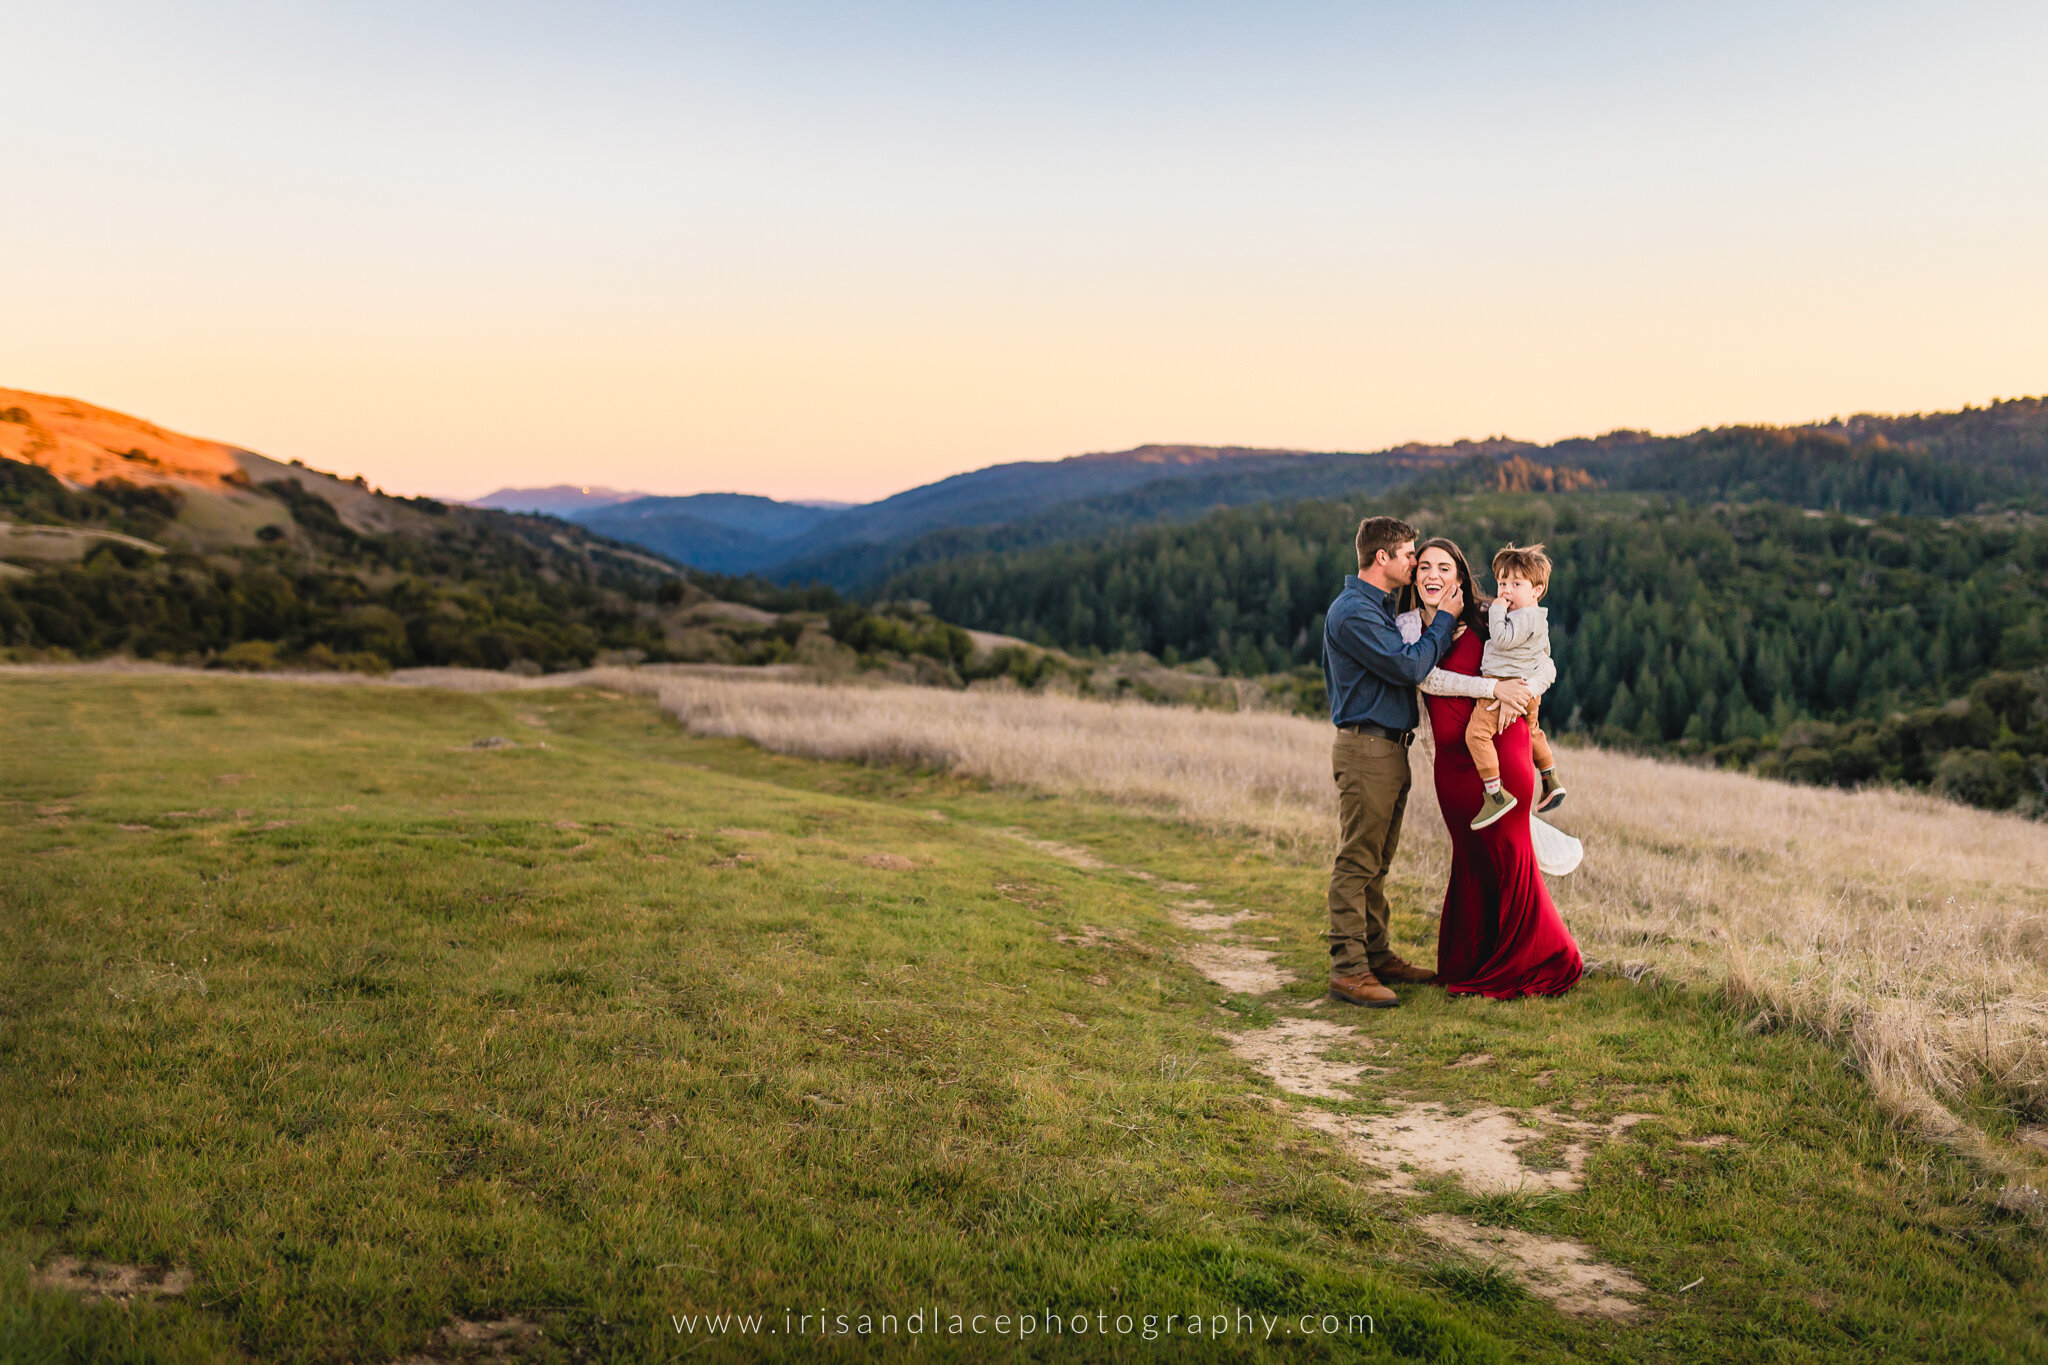 Mountaintop Sunset Lifestyle Photography  |   Iris and Lace Photography 